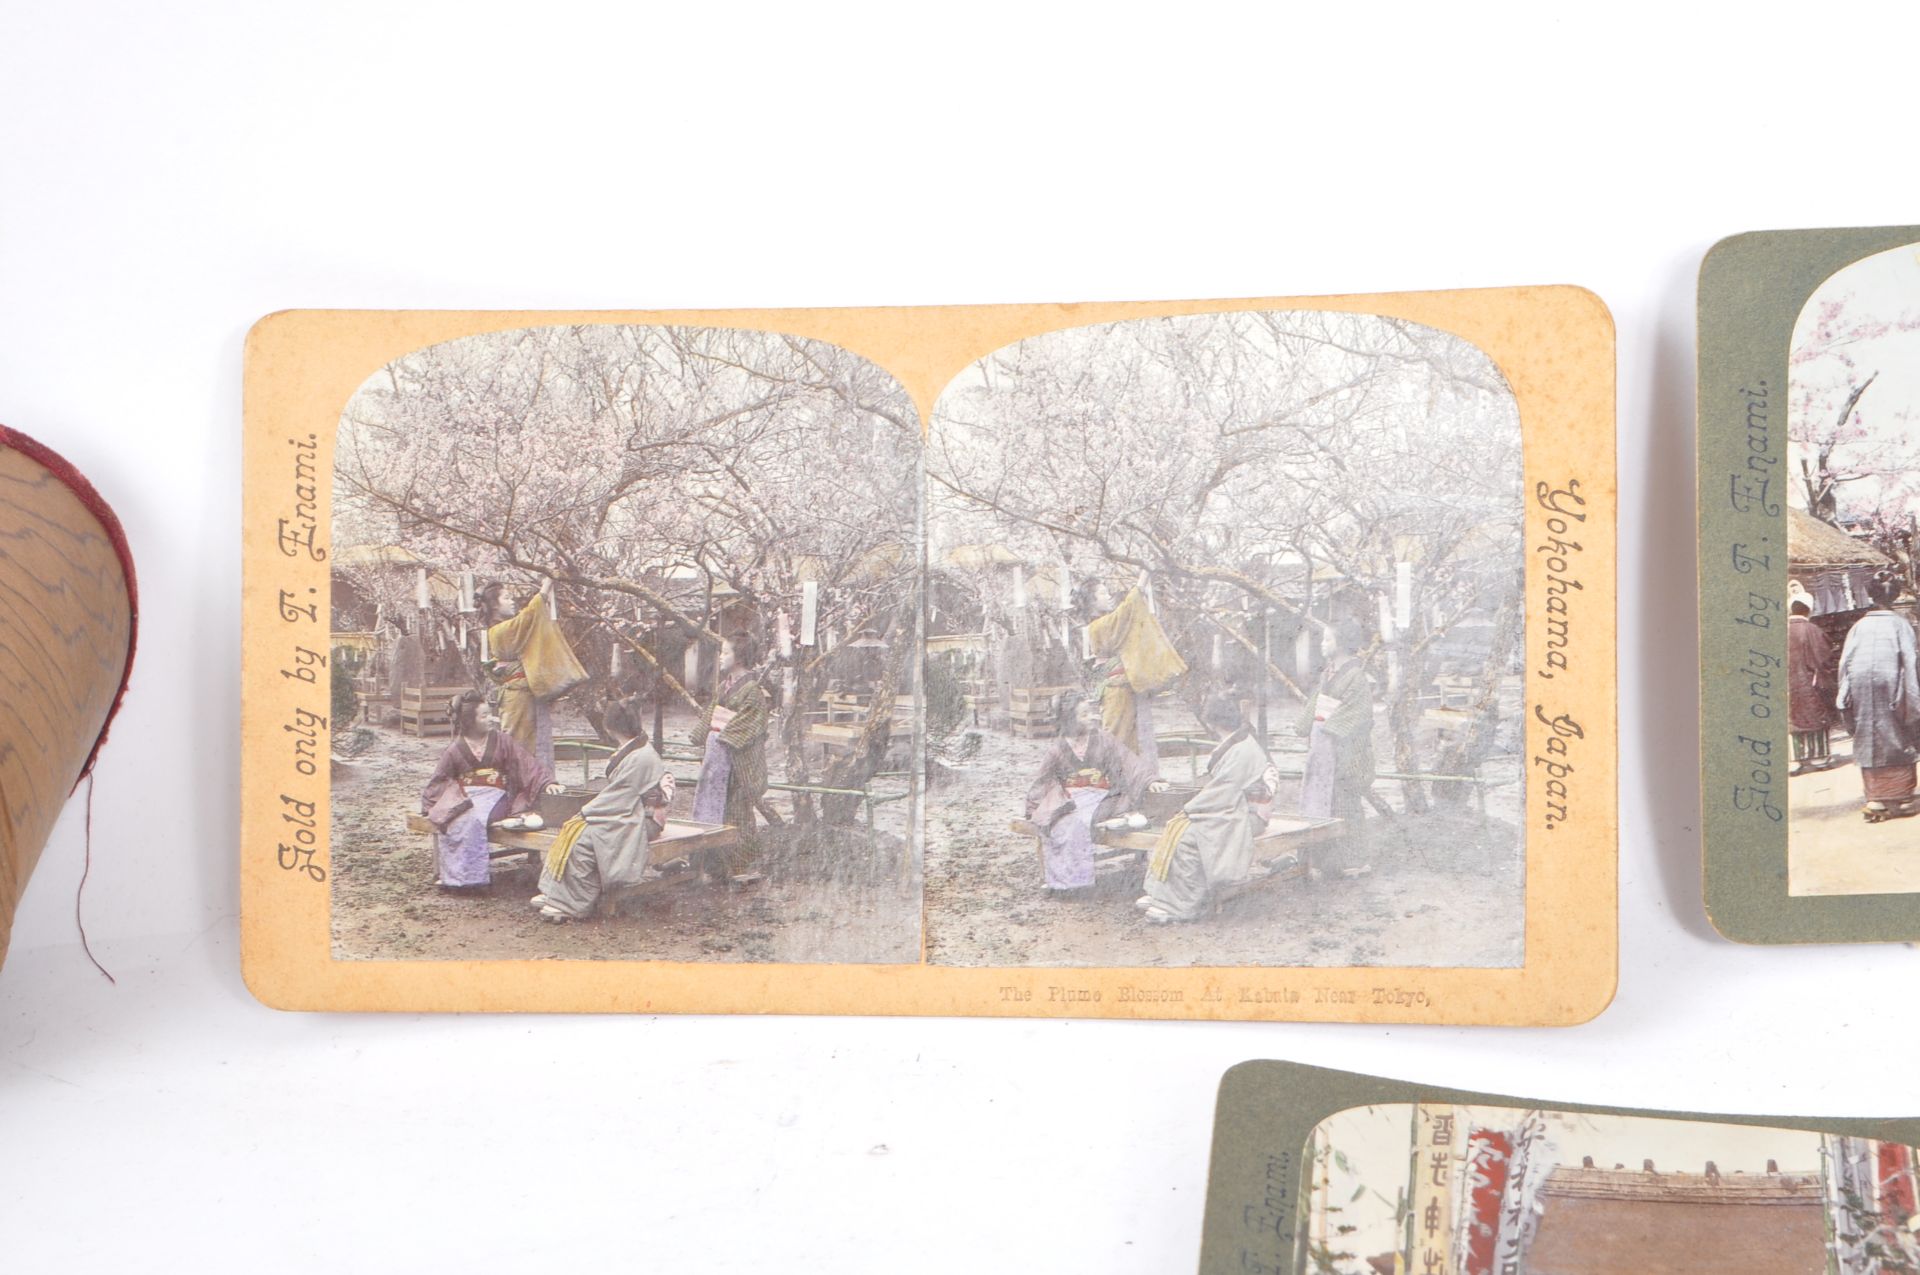 CIRCA. 1970S STEREOSCOPE VIEWER WITH SLIDES OF JAPAN - Image 6 of 8